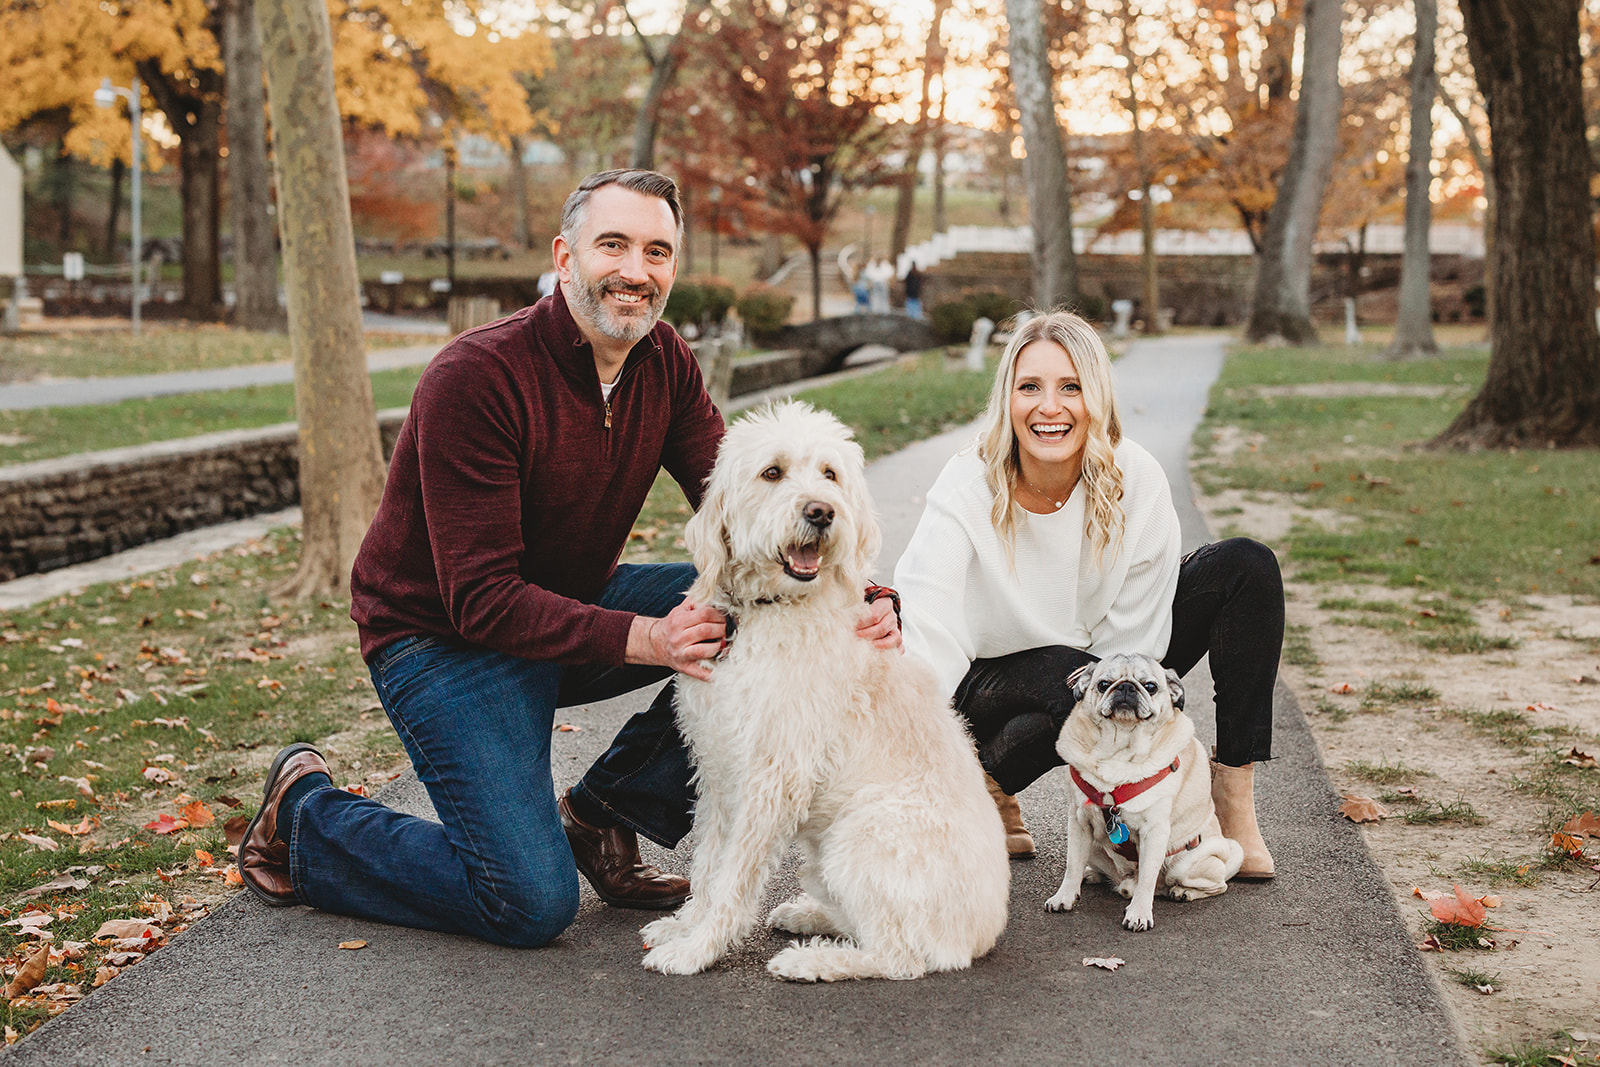 outdoor fall engagement session at Lititz Springs Park in central Pennsylvania Wilbur Buds railroad tracks dogs